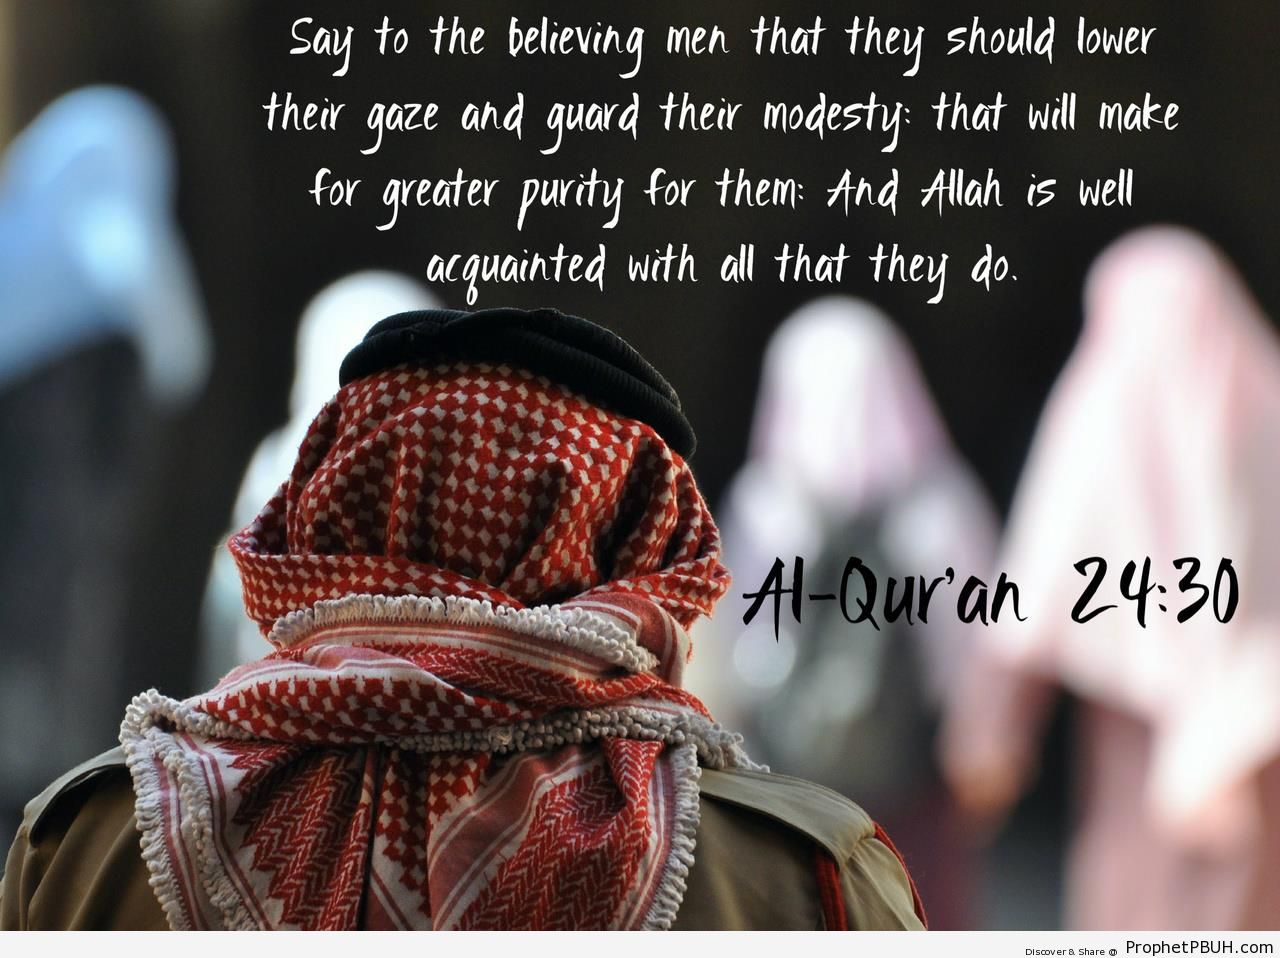 Surat an-Nur - Quran 24-30 - Islamic Quotes About Modesty and Lowering the Gaze -001